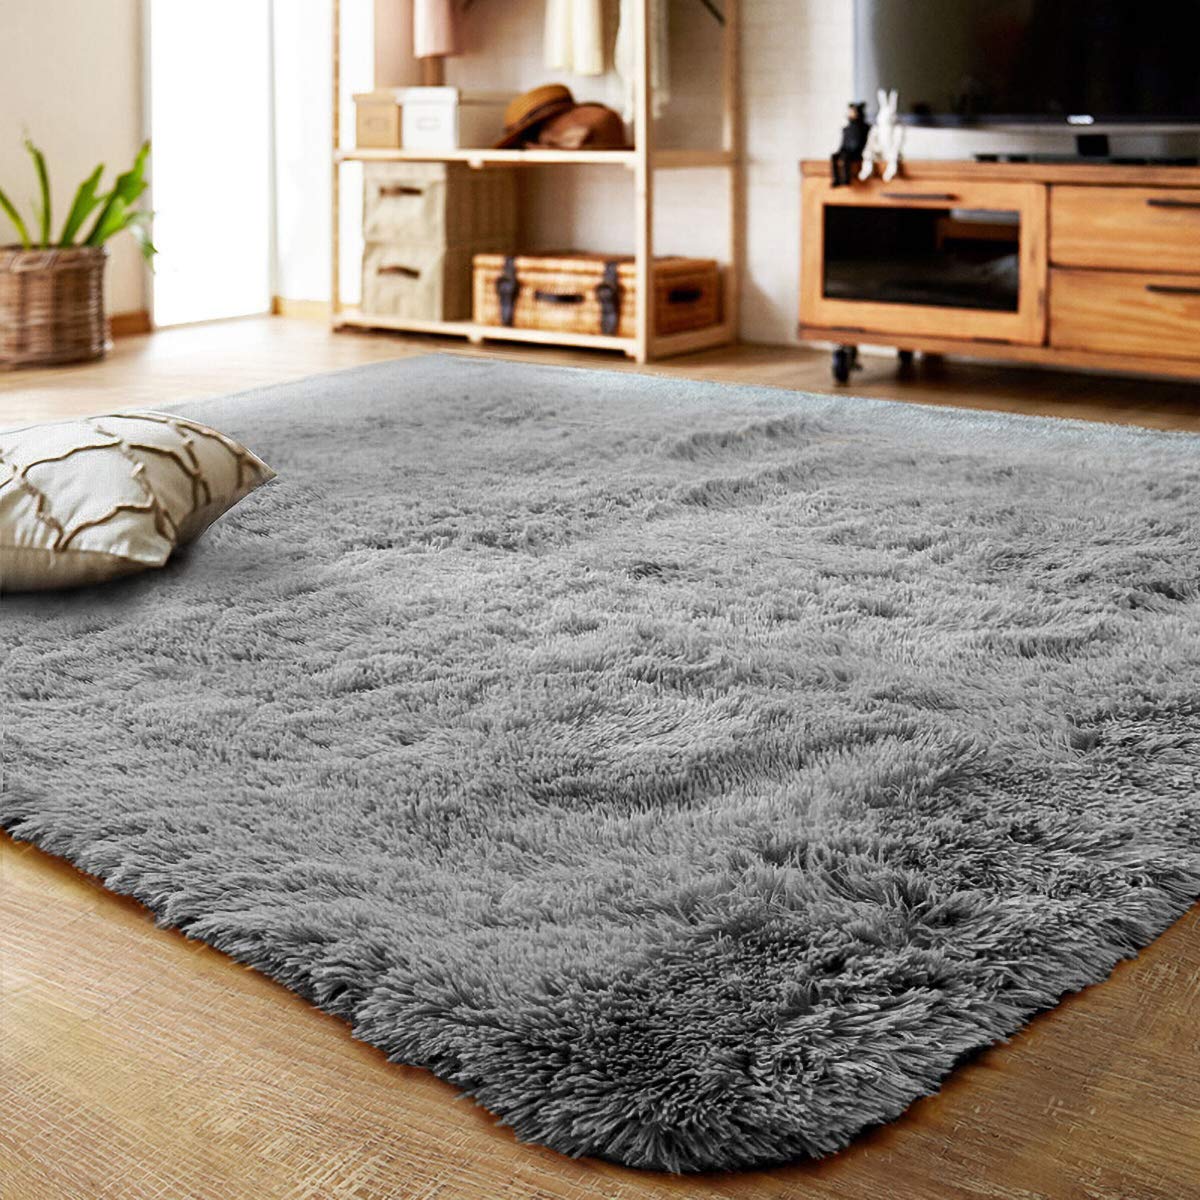 LOCHAS Area Rugs for Living Room, Fluffy Shaggy Super Soft Carpet Suitable as Bedroom Rug Nursery Rugs Kids Mat, Large Floor Mat Furry Plush Rug for Home Decor 160 X 230cm Grey